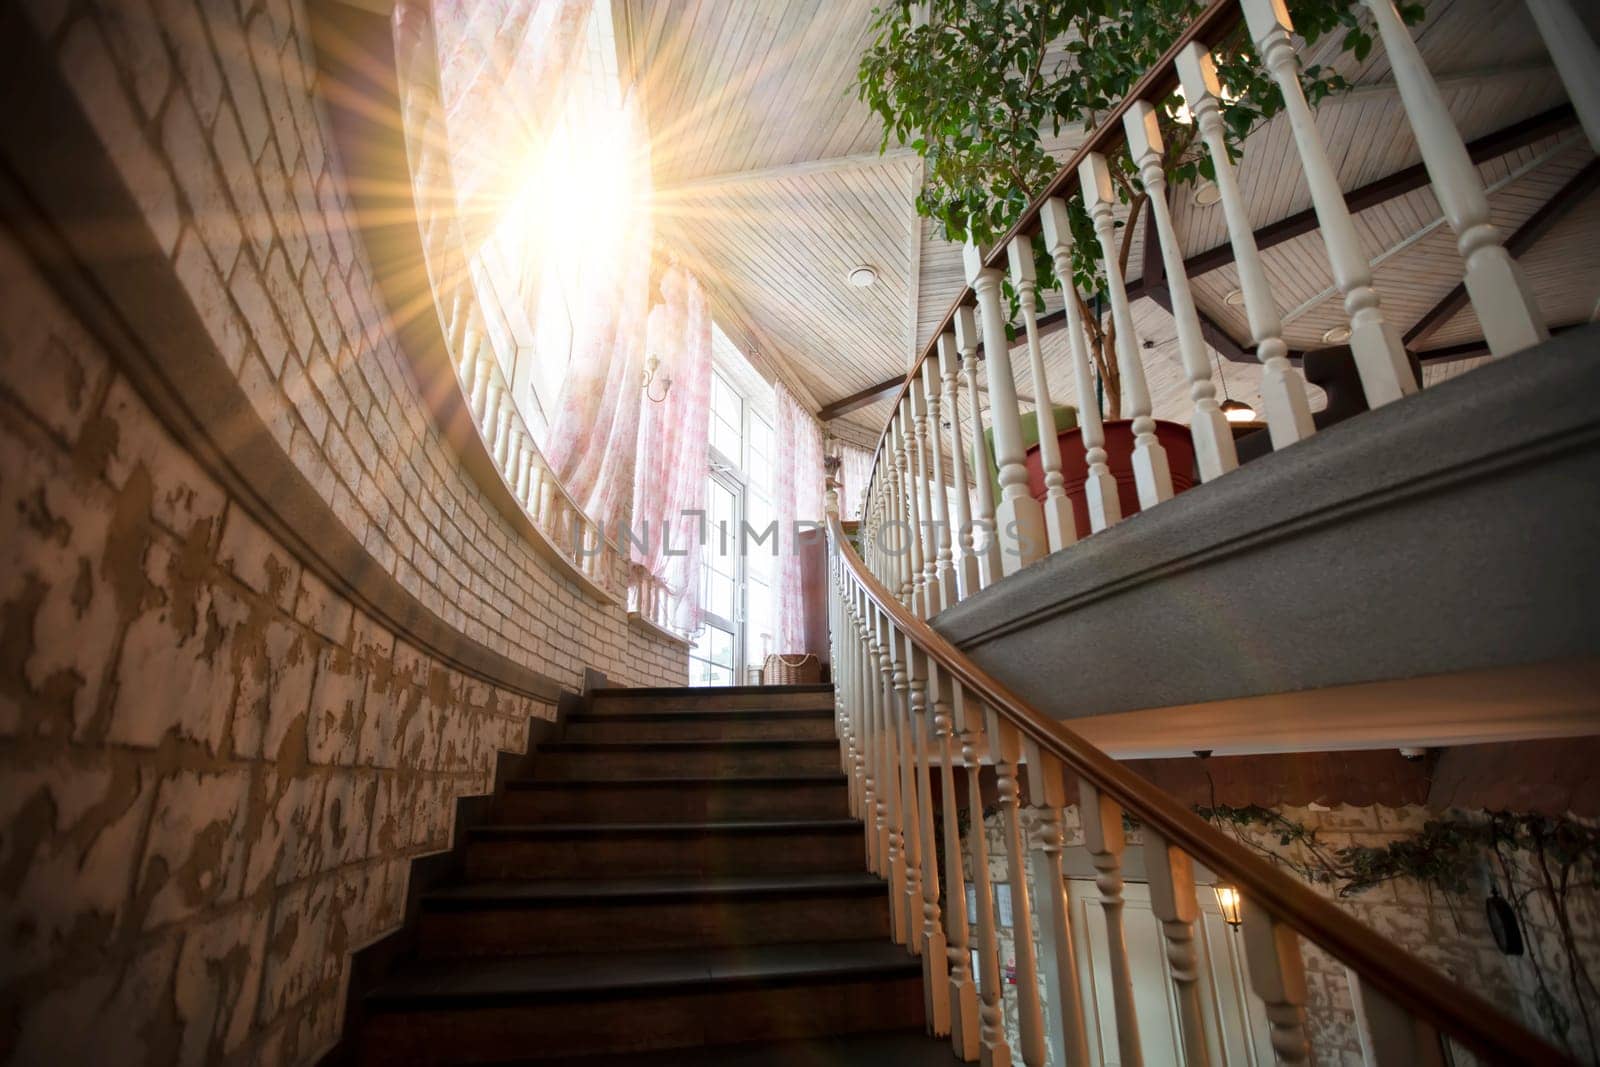 A spiral staircase with wooden railings leads up to the top illuminated by the sun.